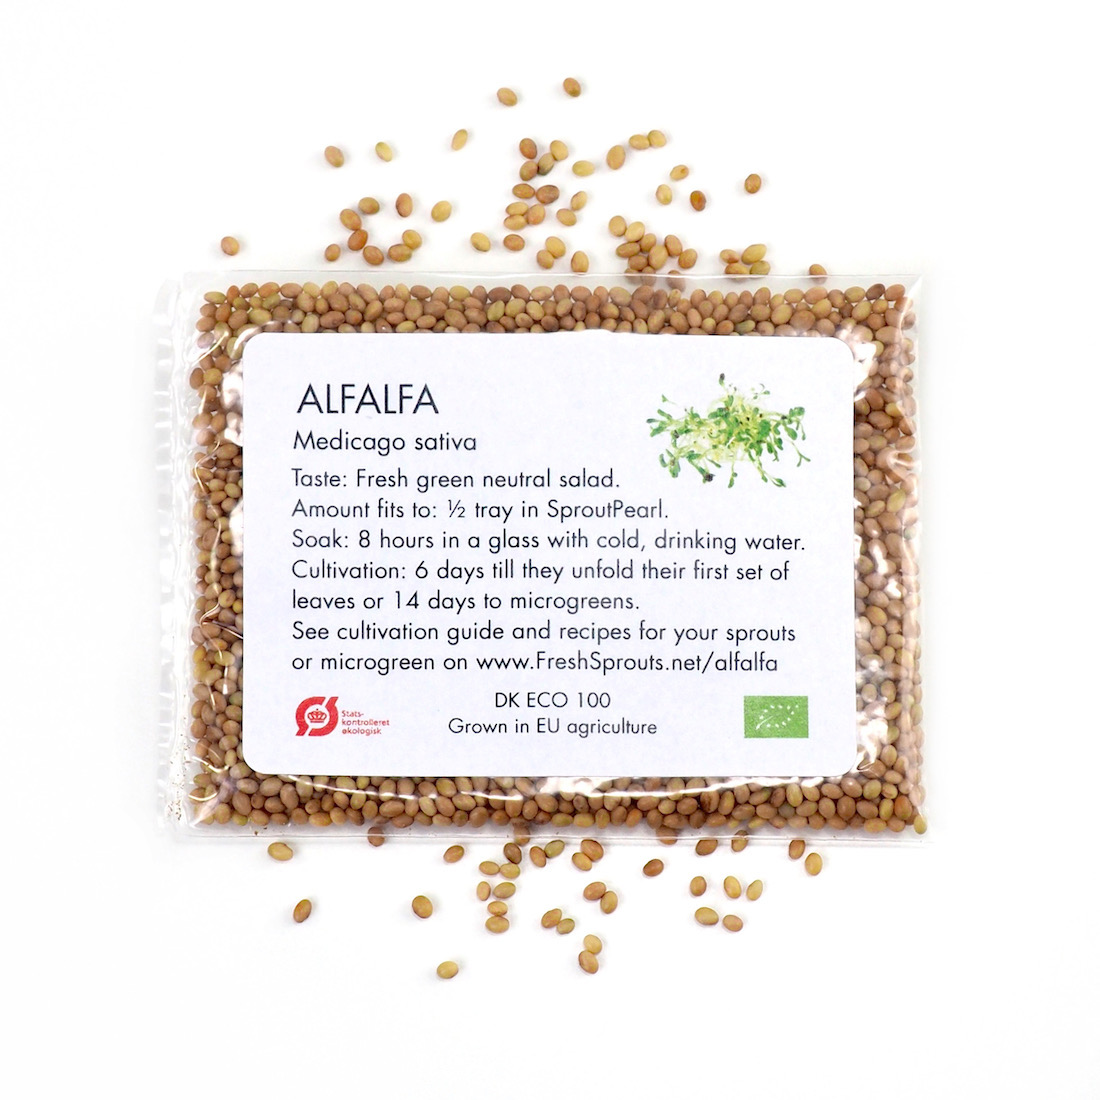 Organic Alfalfa seeds for Sprouts and Microgreens 4 gram